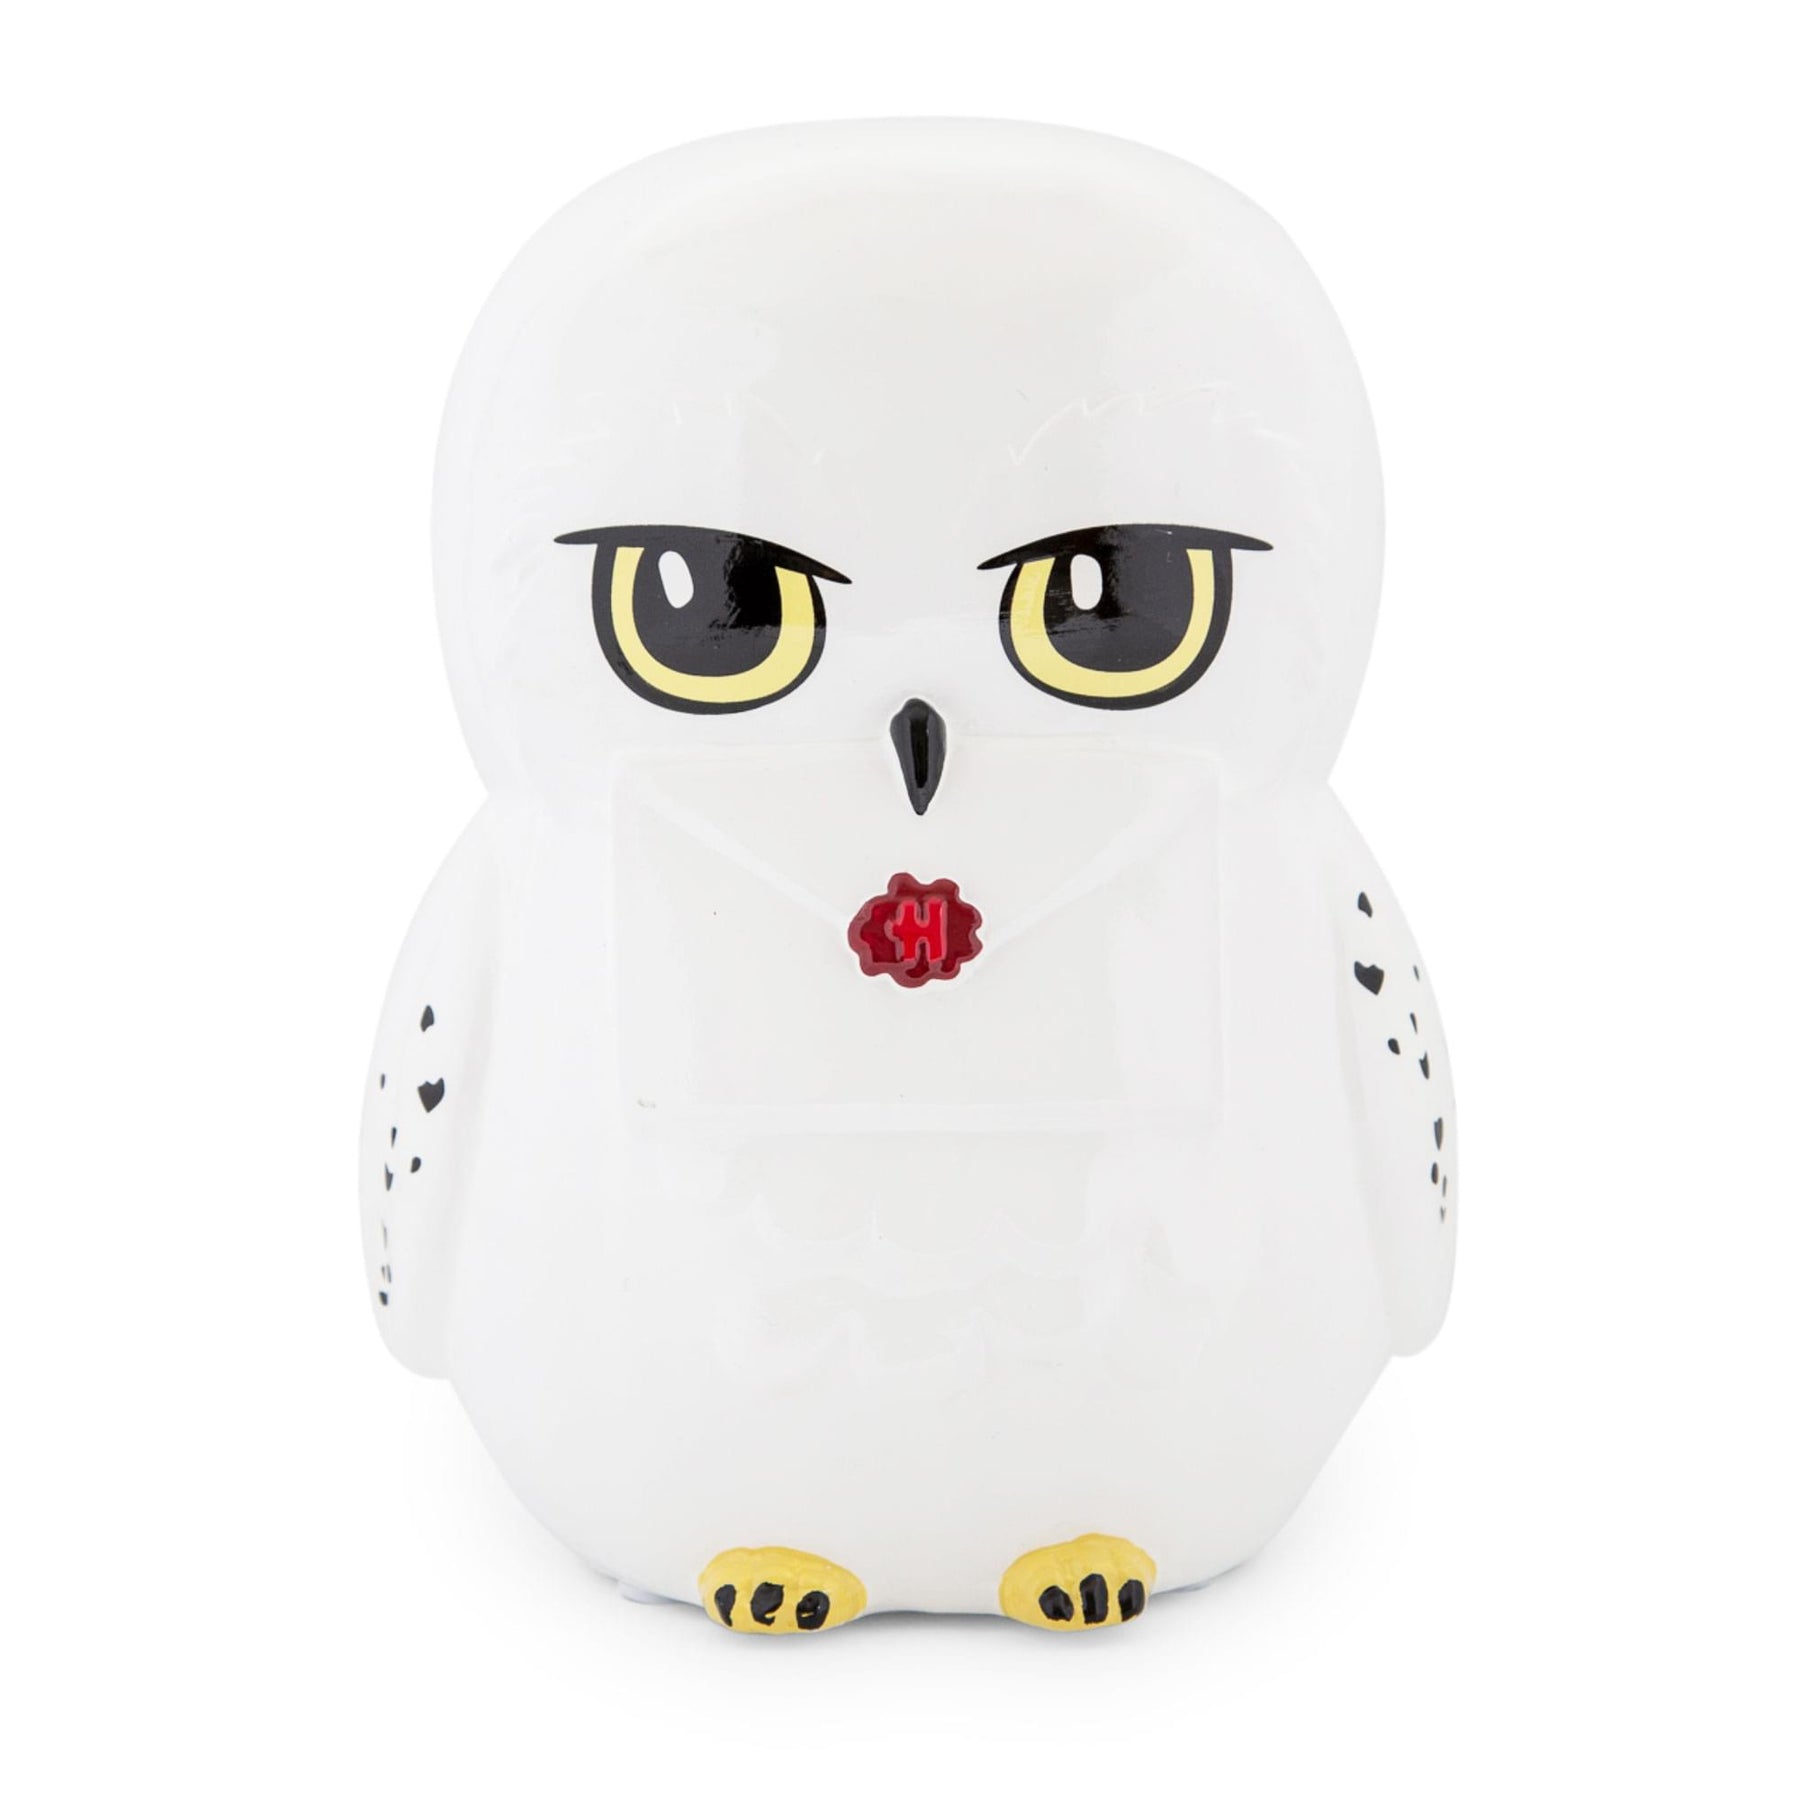 Squishmallows Harry Potter Hedwig 8 Inch Plush